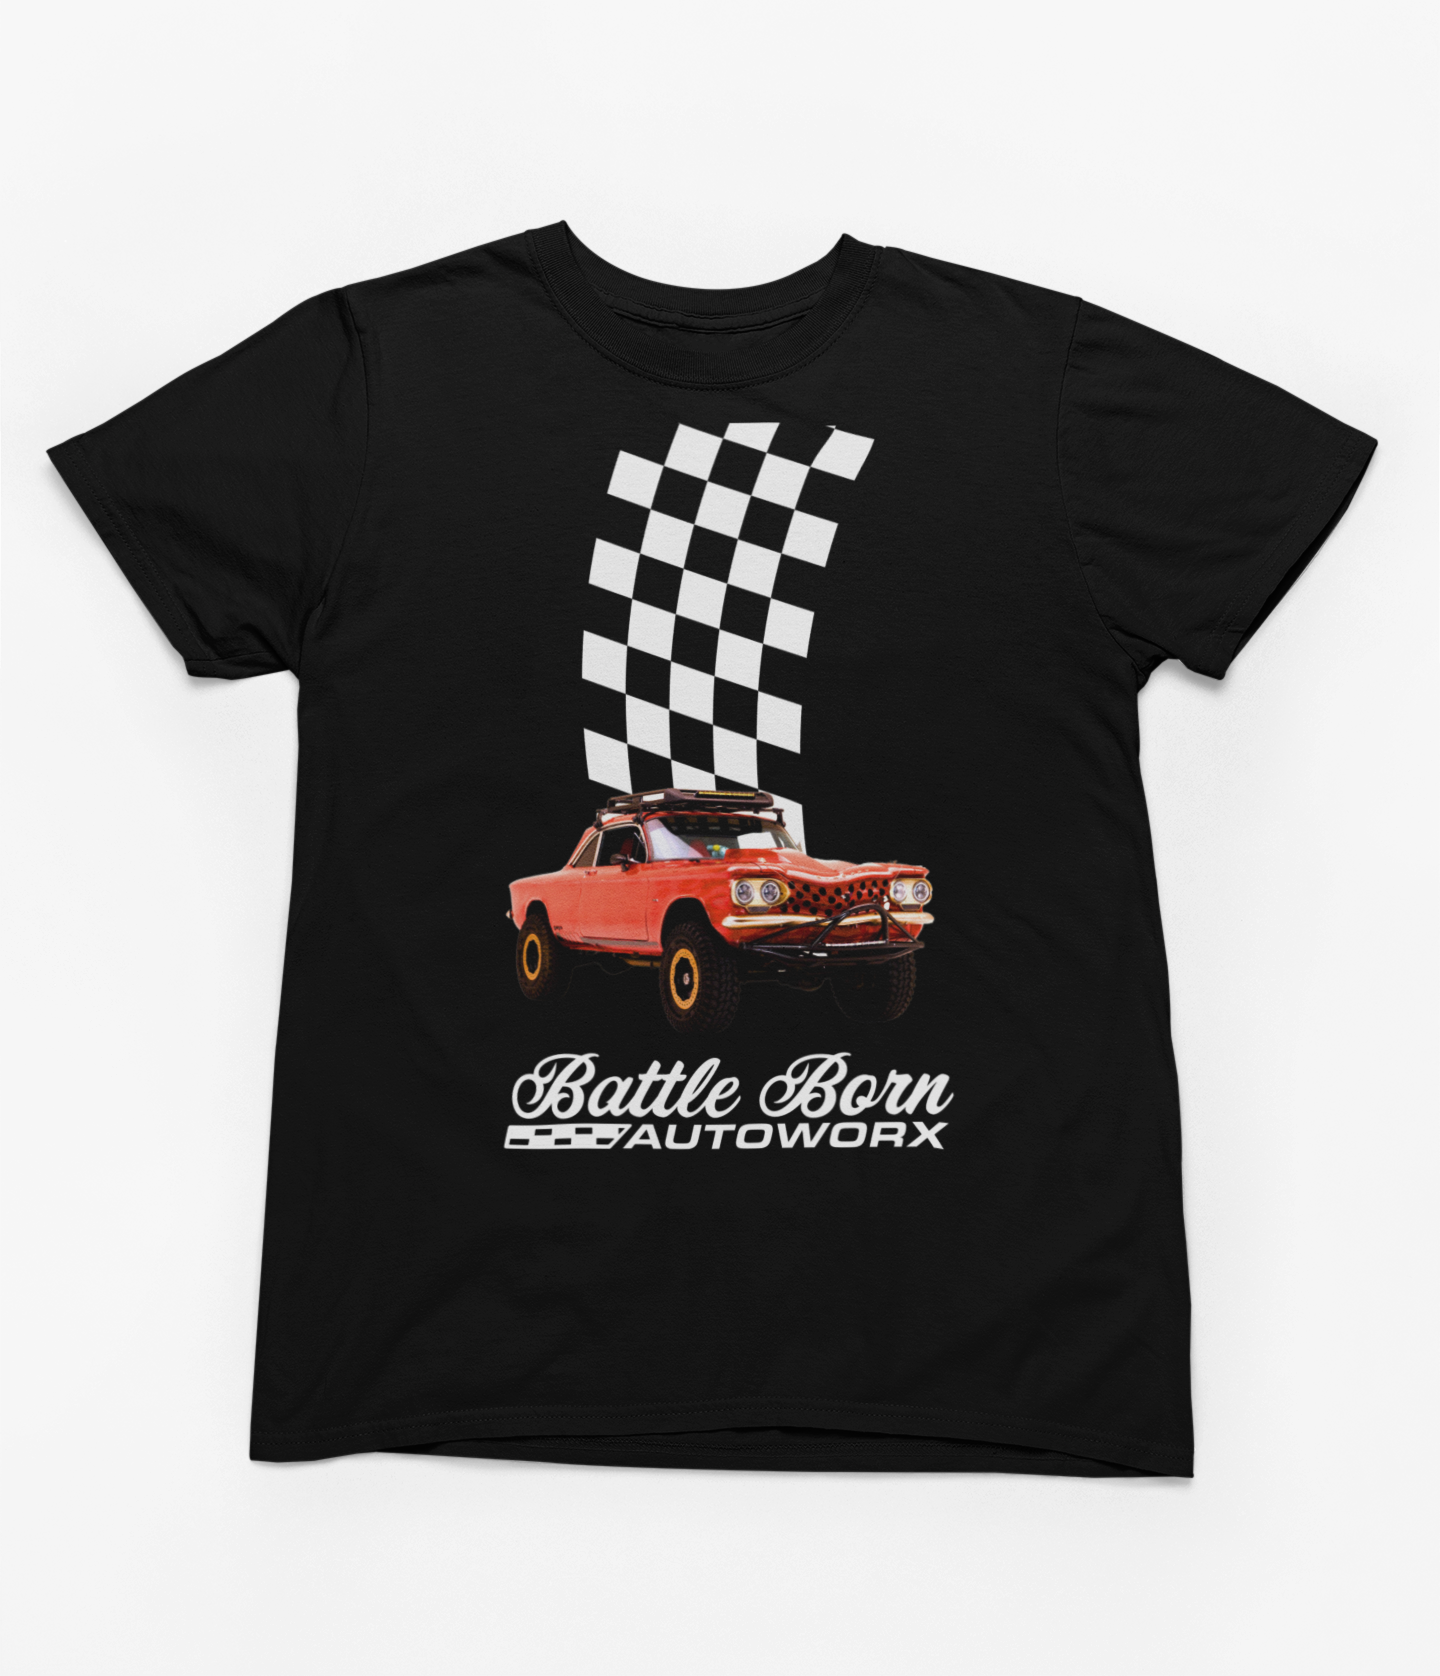 Battle Born Autoworx Race Tee in Black - Unleash your inner speed demon with this sleek and stylish black tee. Perfect for gearheads and adrenaline enthusiasts. Available at BattleBornAutoworx.com.